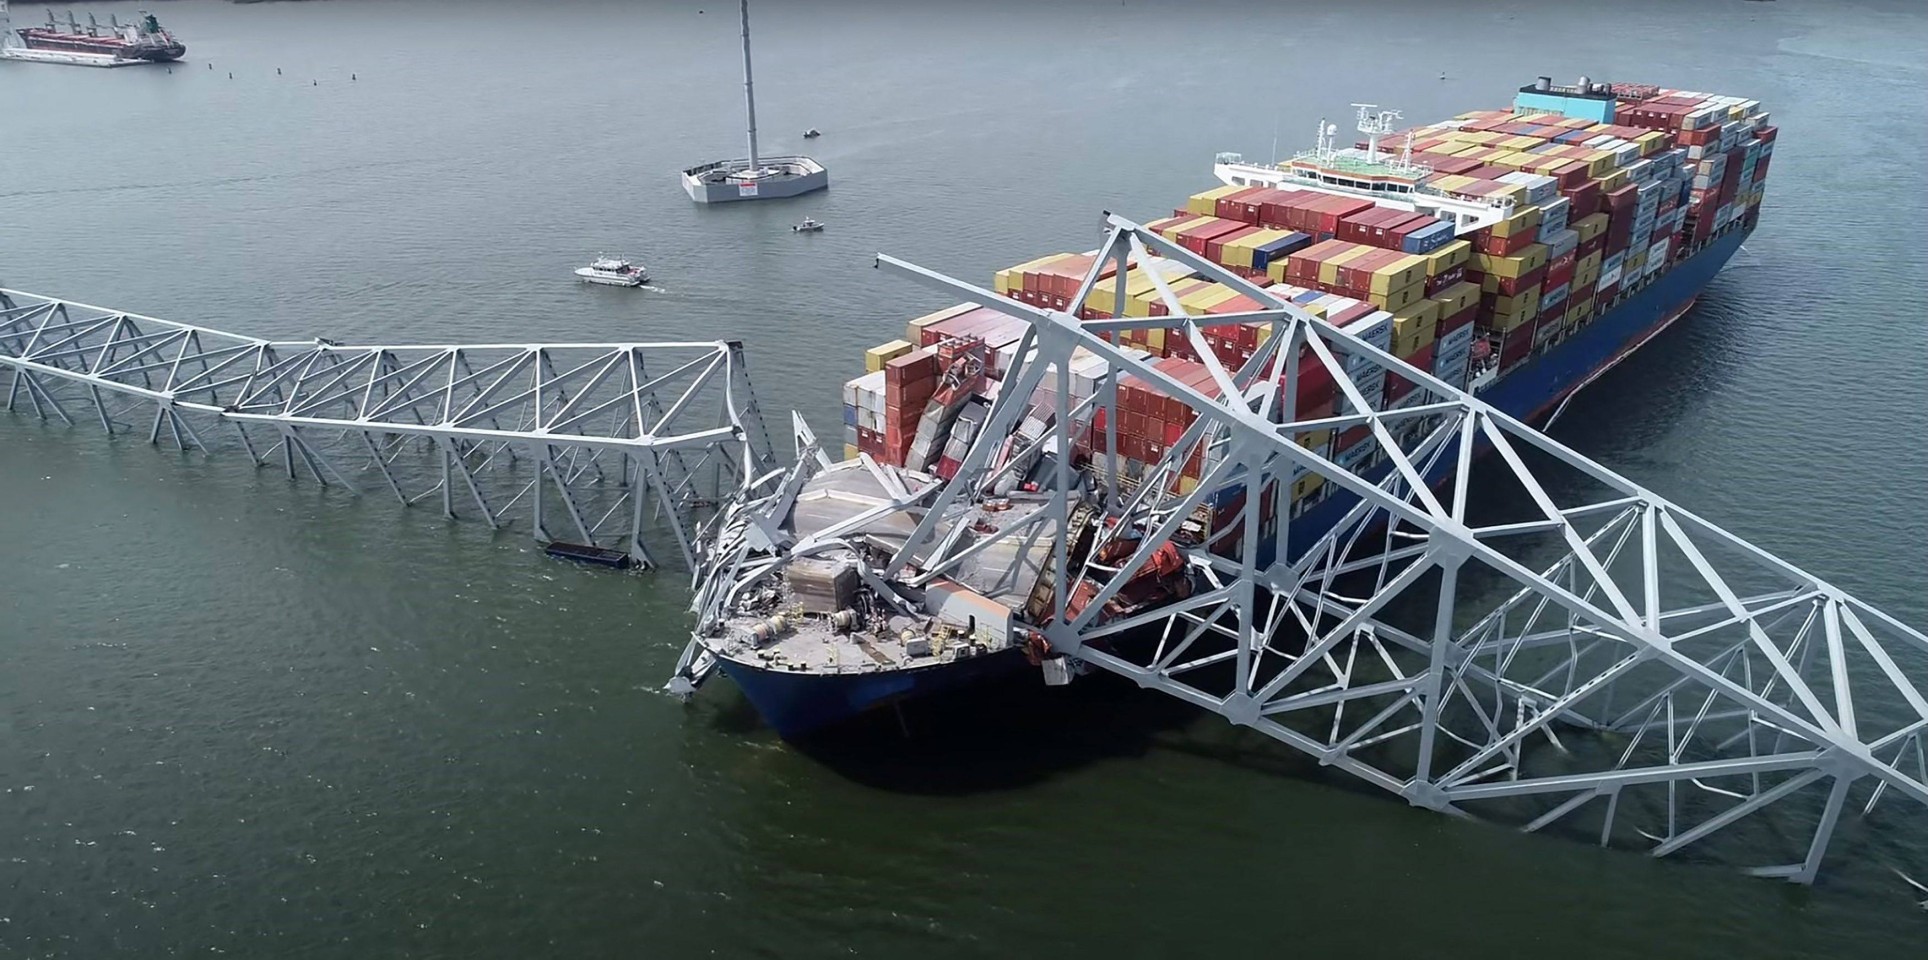 Baltimore bridge collapse may lead to 'largest single marine insurance loss  ever', Lloyd's of London says | South China Morning Post